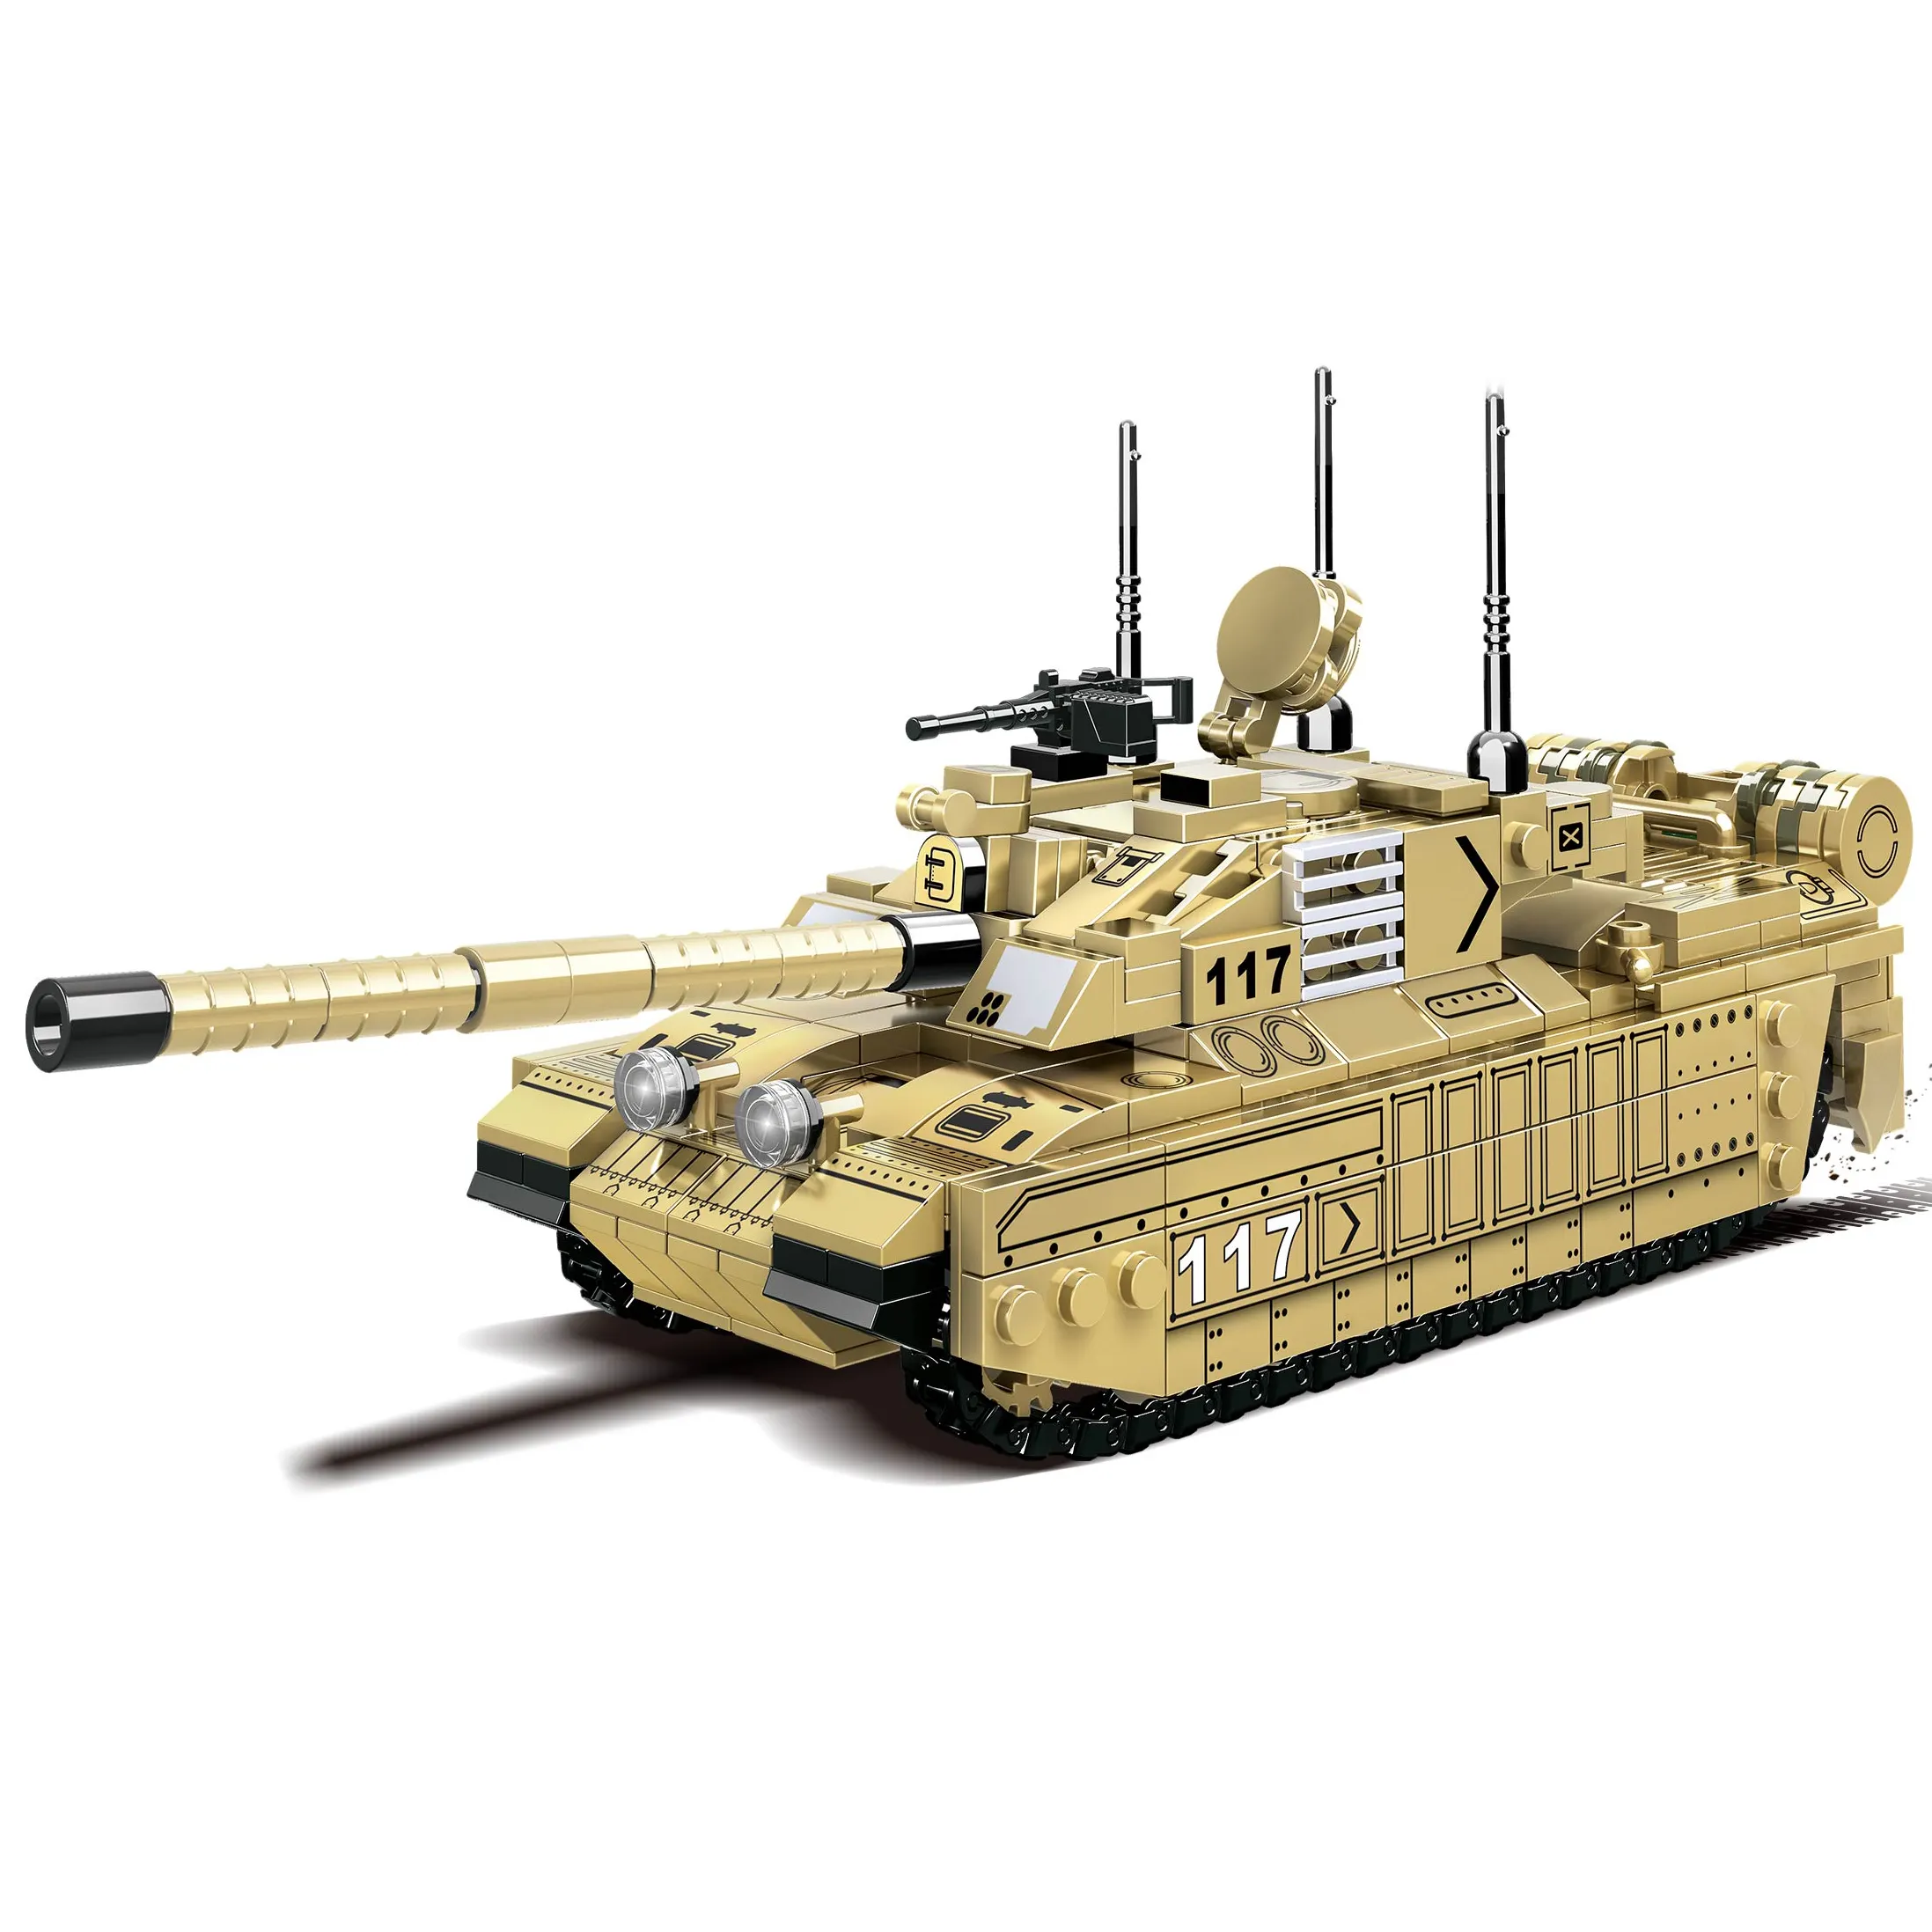 Military building blocks modern tank model assembling stacking puzzle mini building blocks sets toy gifts legoing